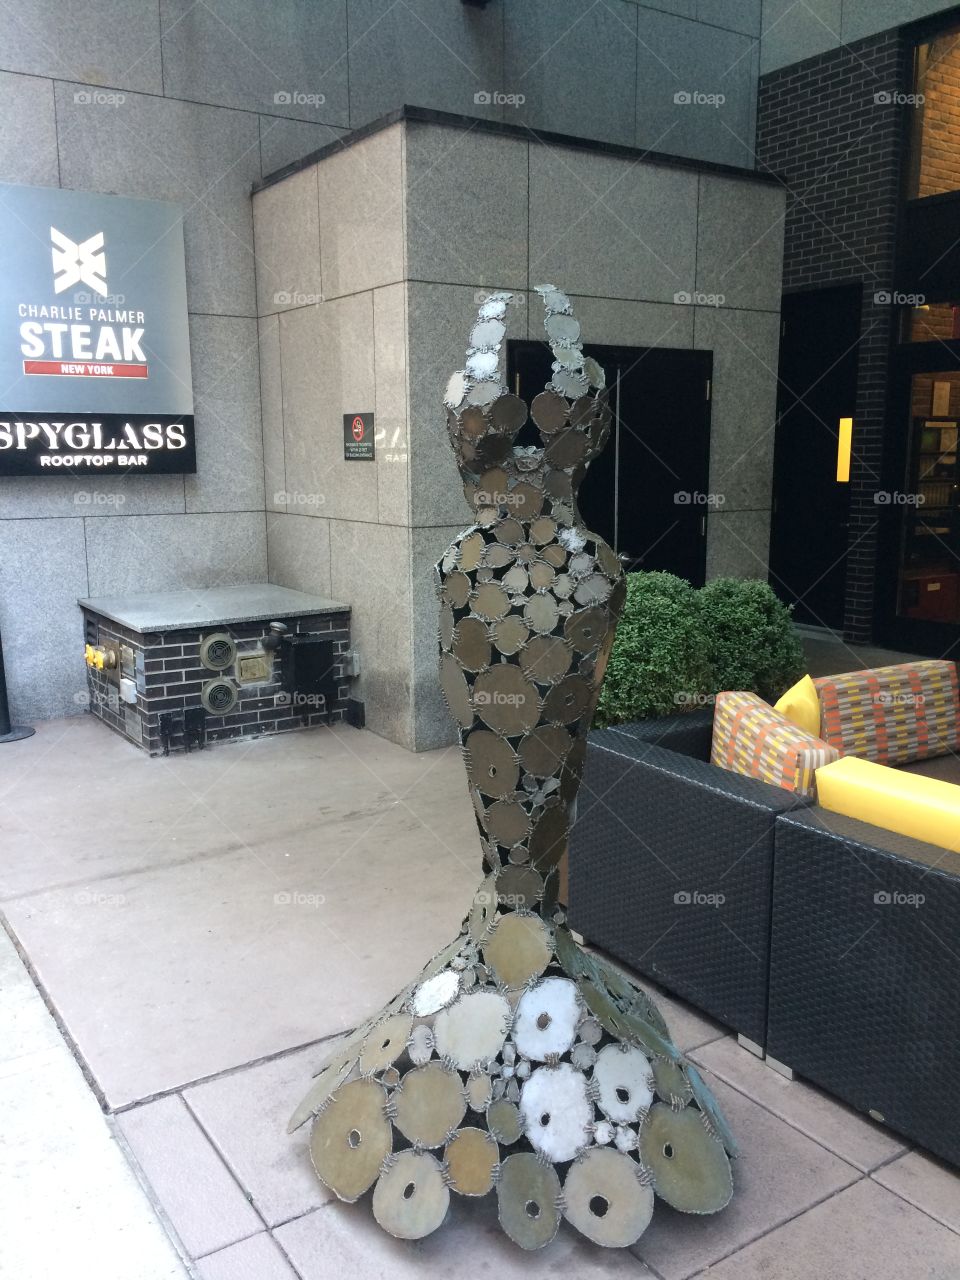 Metal Dress - Hotel in Fashion District NYC